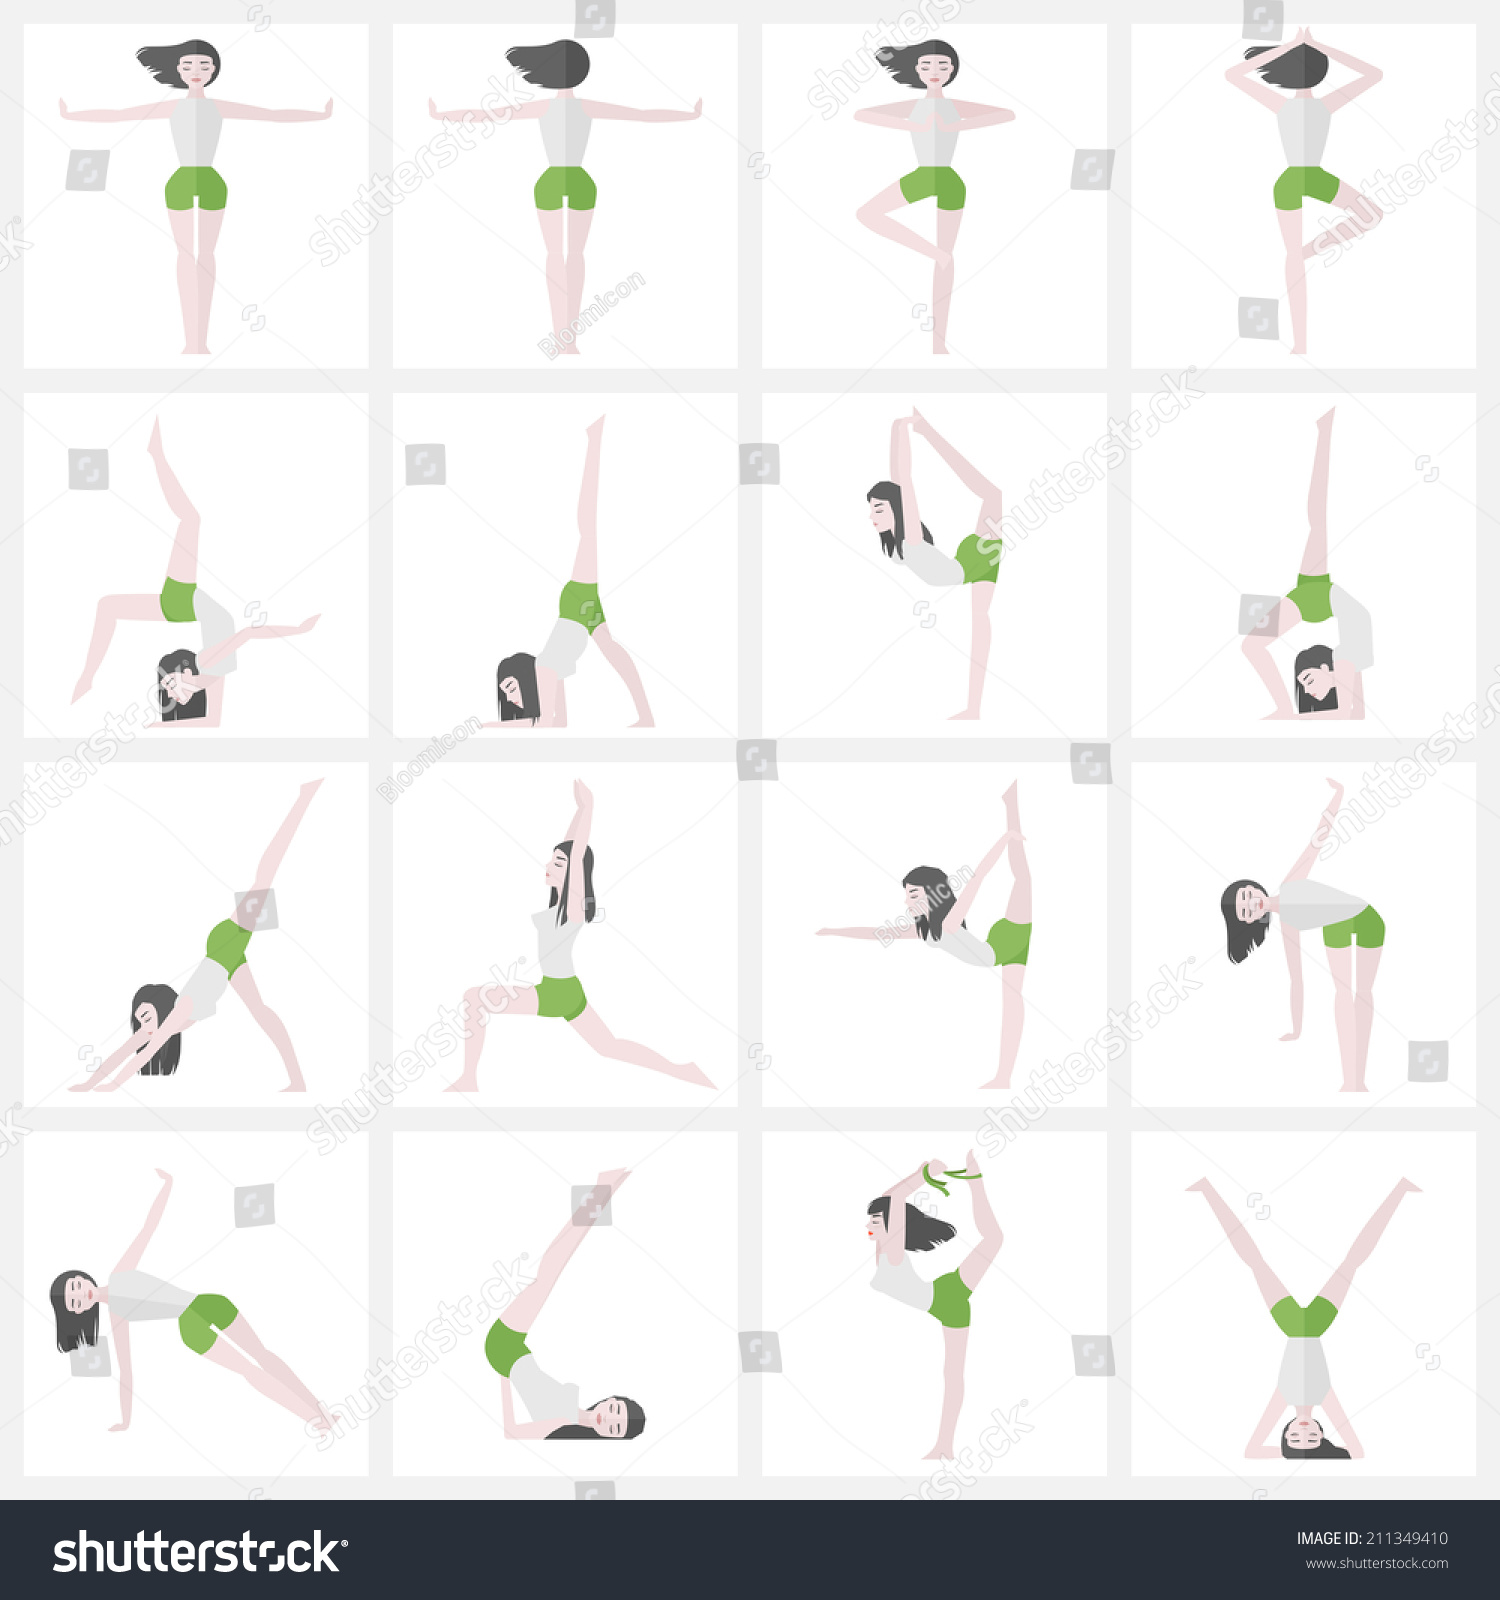 advanced yoga poses and positions